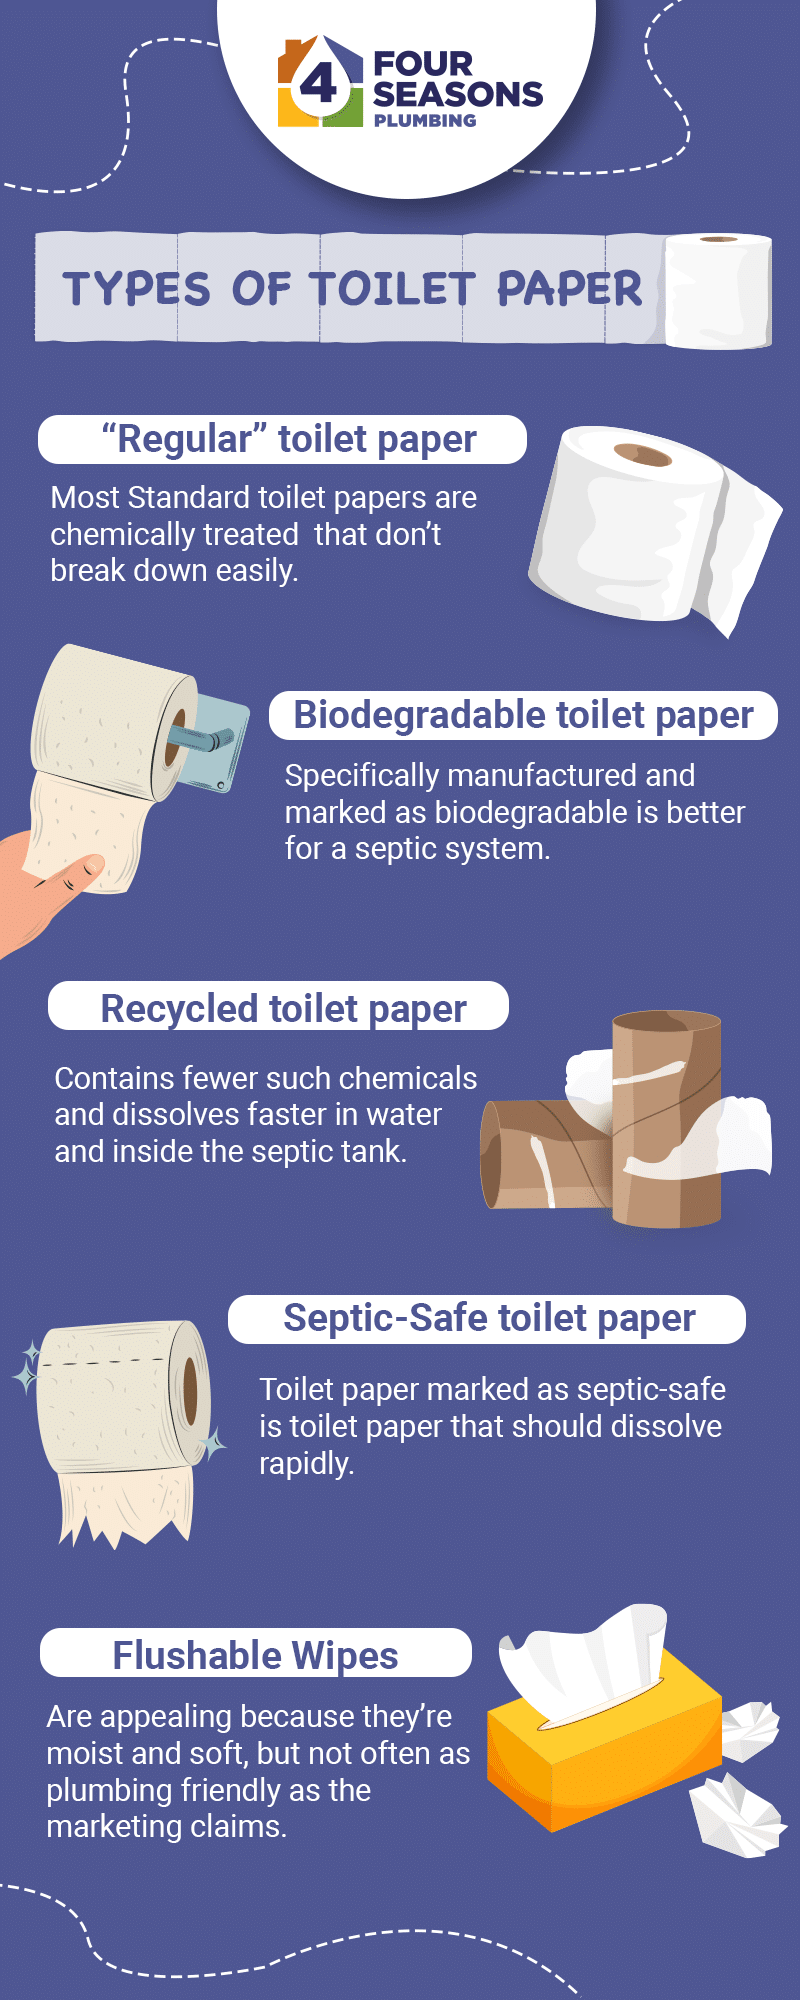 Why you should DITCH toilet paper for good - for the sake of your health